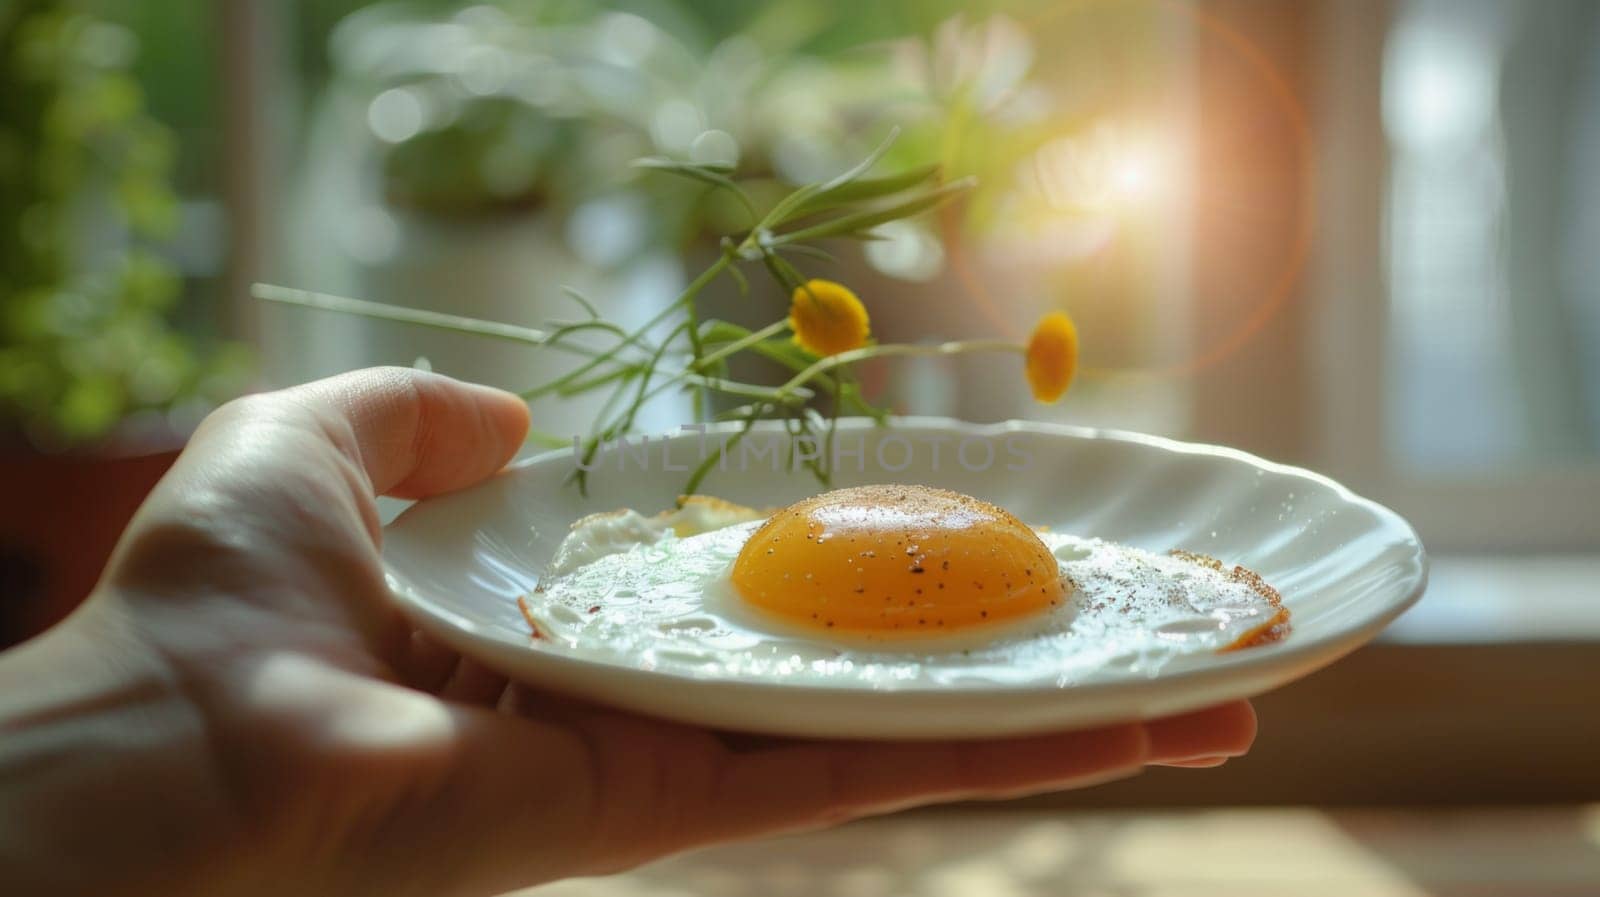 A person holding a plate with an egg on it